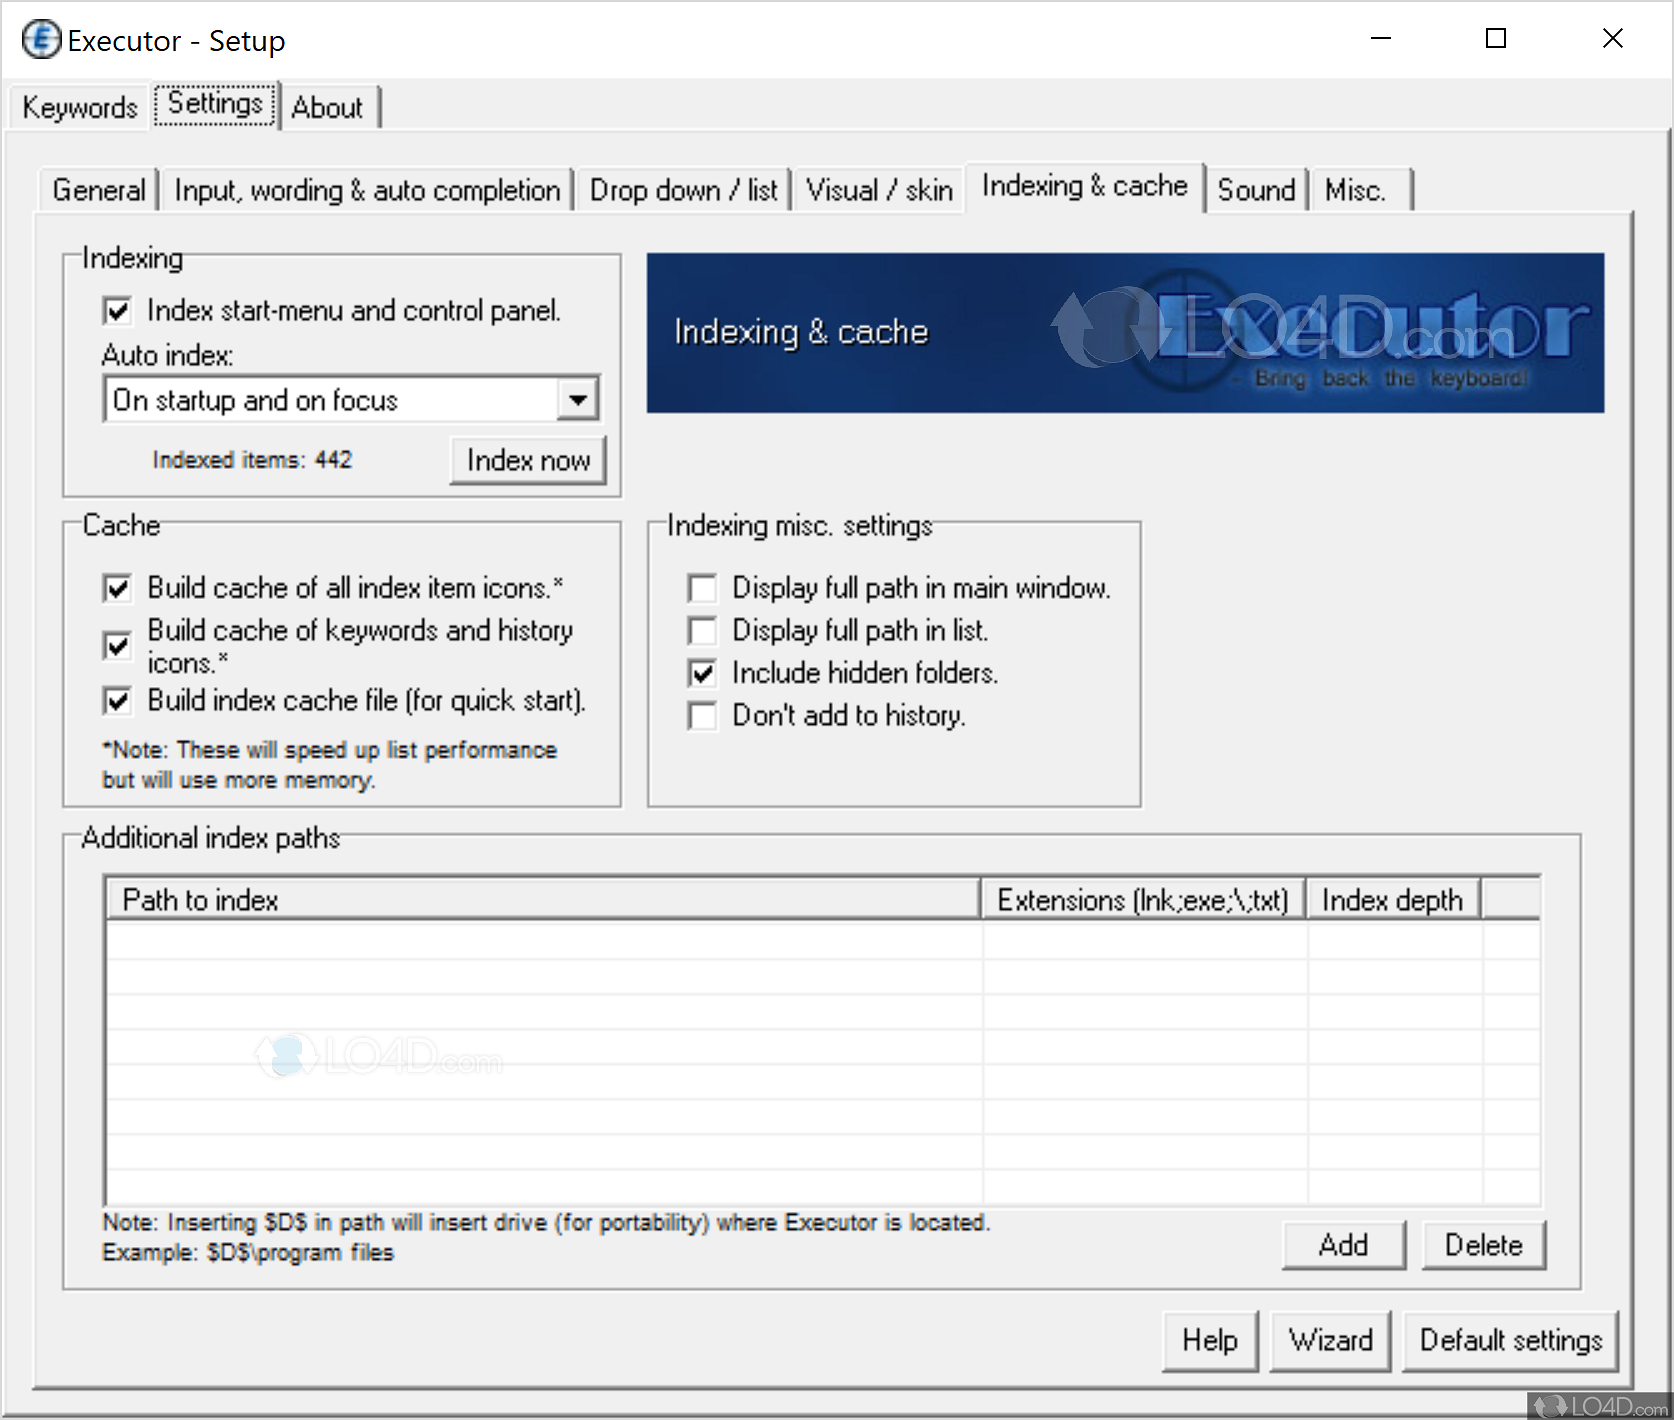 instal the new USB Drive Letter Manager 5.5.11